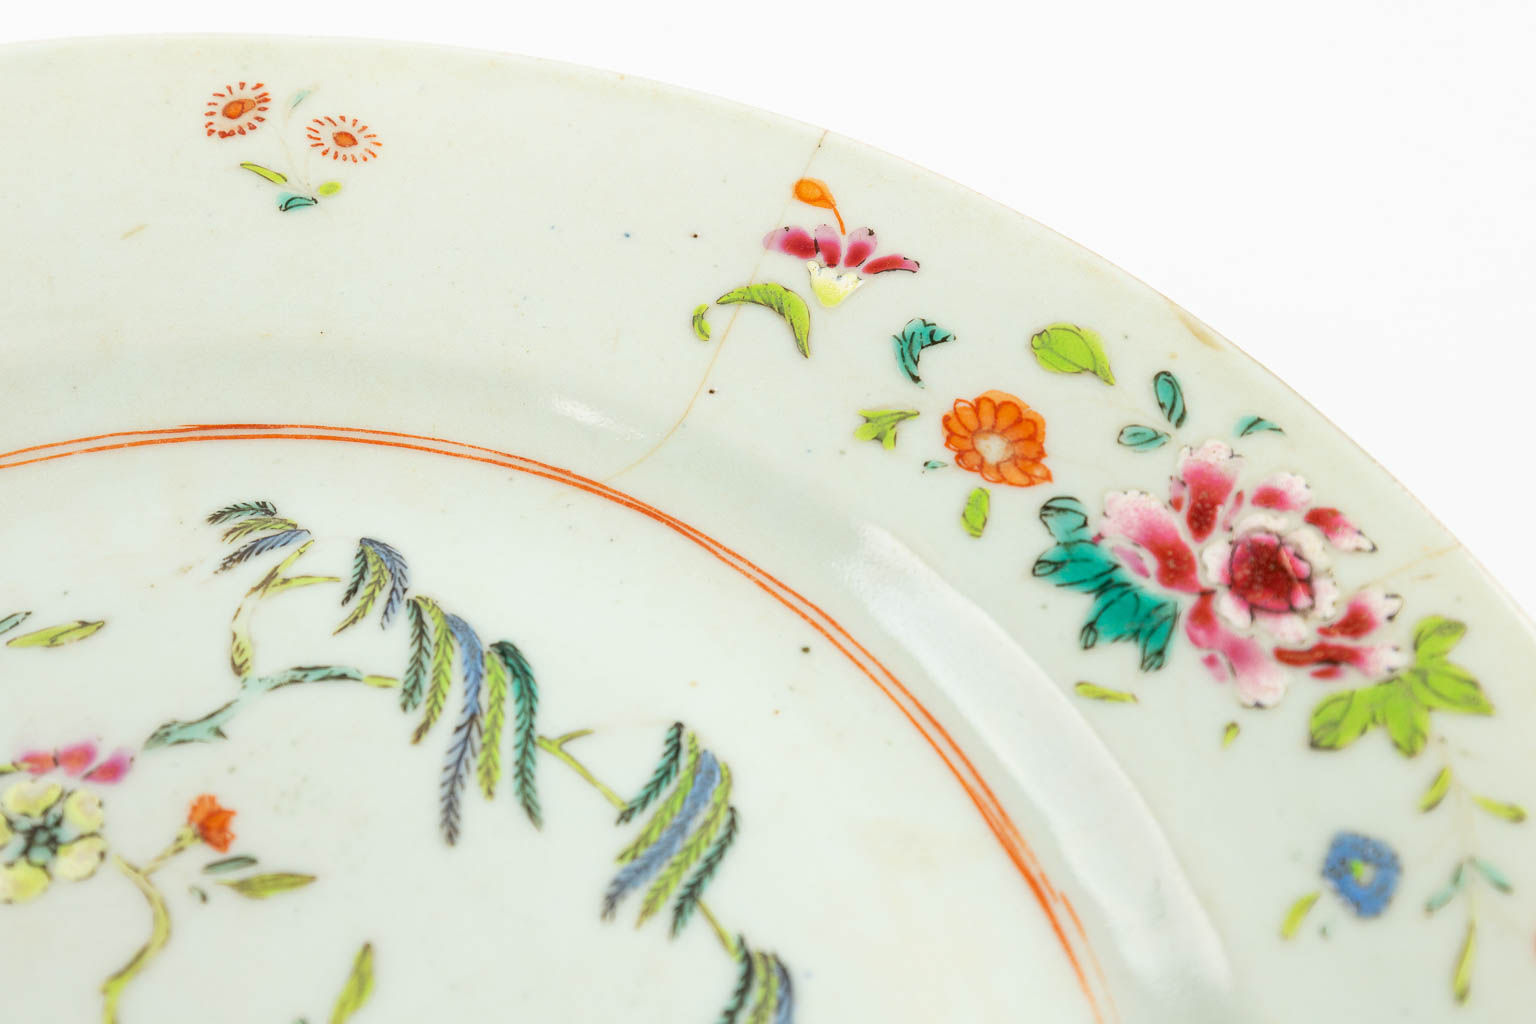 A collection of 7 Chinese Famille Rose plates with hand-painted flower decors. 